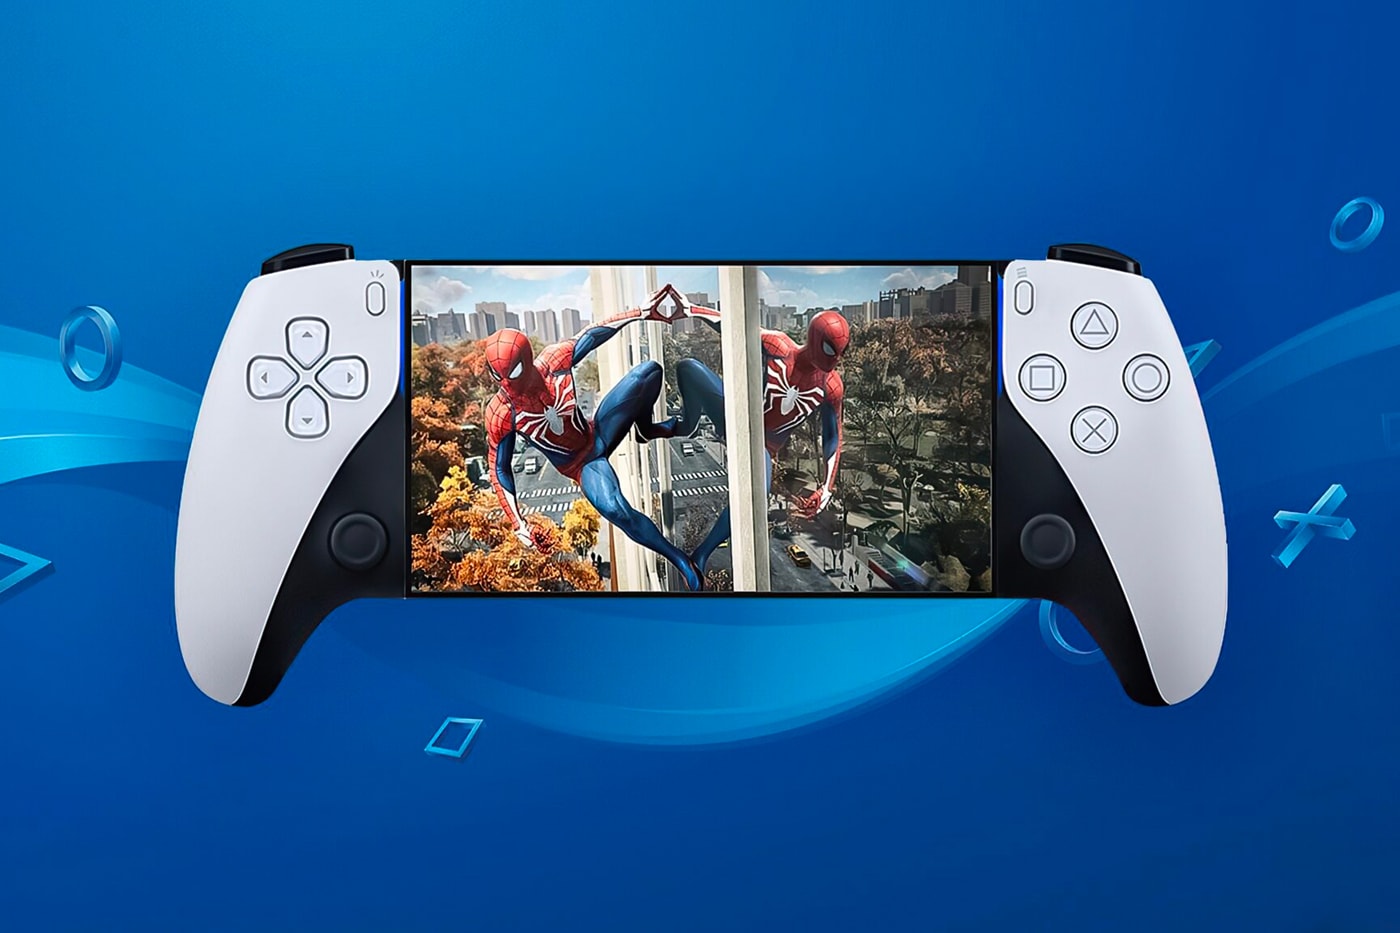 PlayStation Portal, Sony's Handheld Device for PS5 Game Streaming, to  Launch Later This Year at $199.99